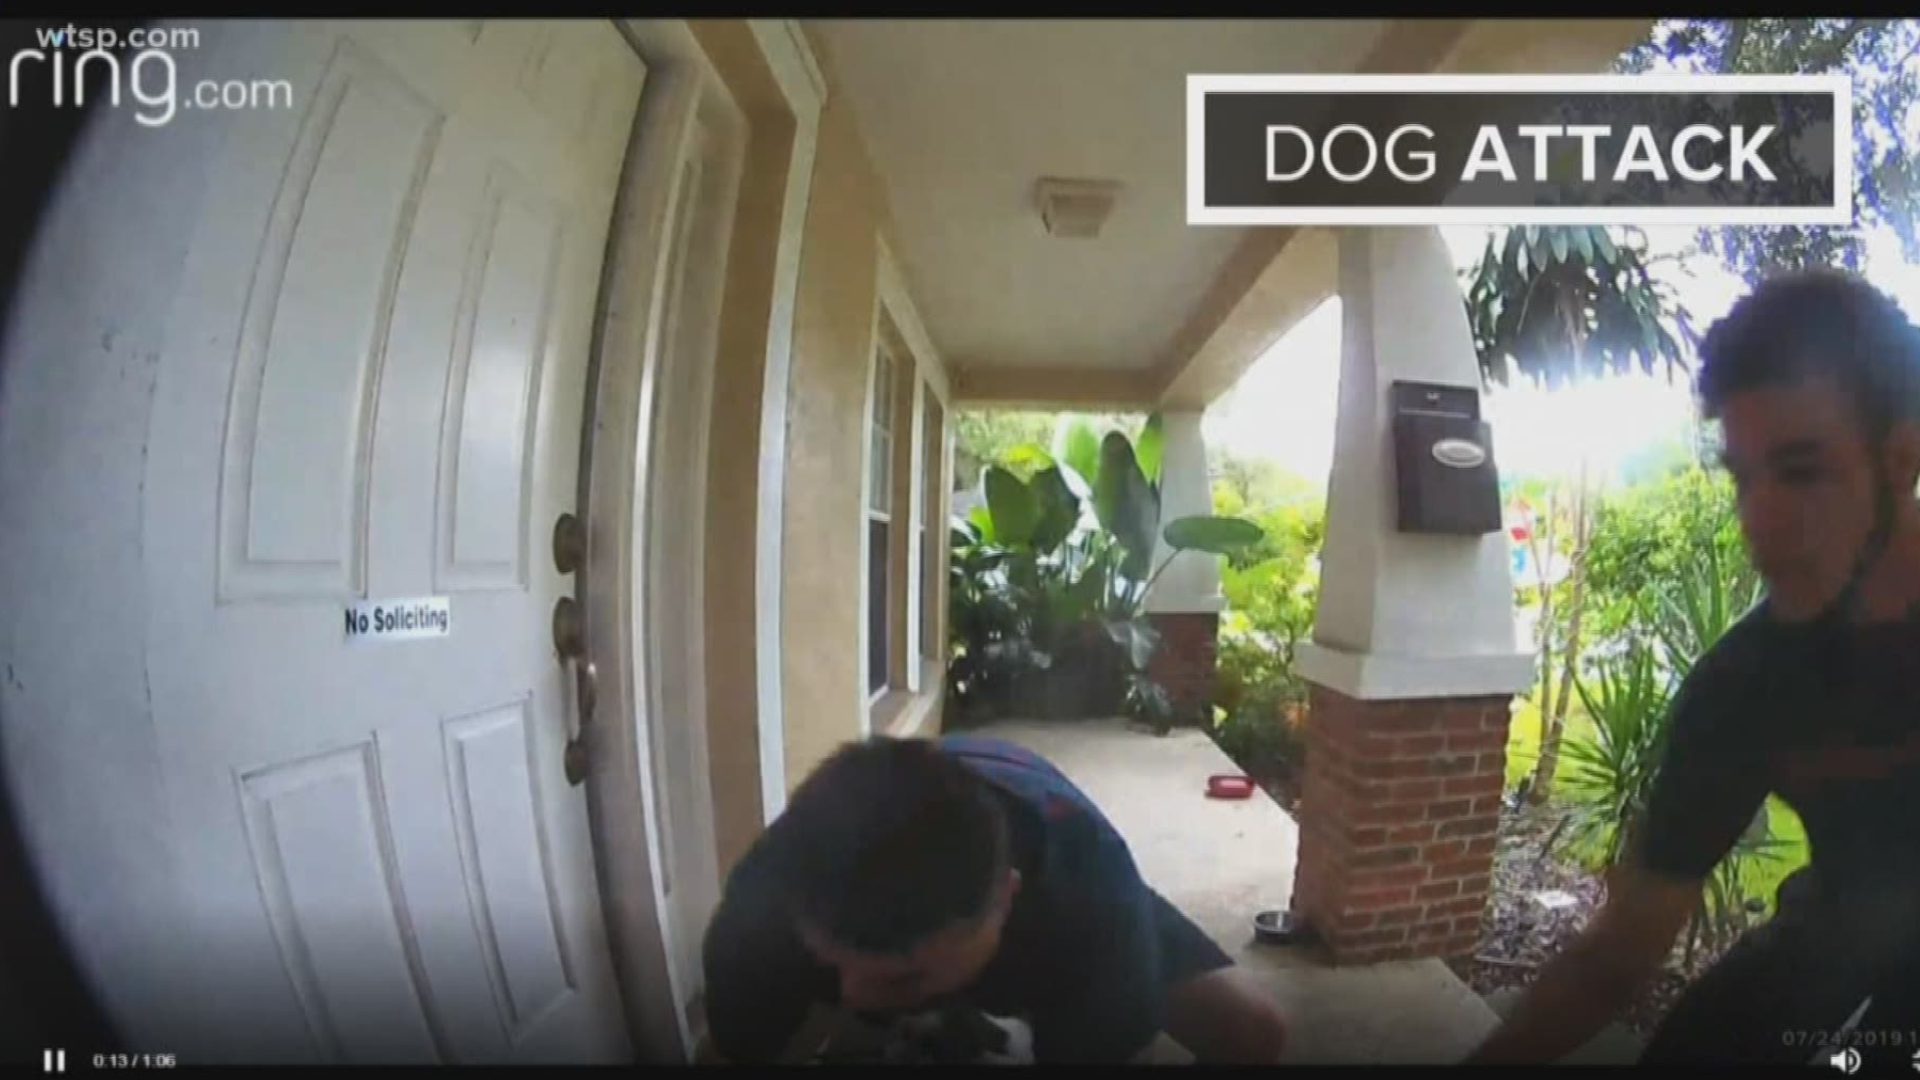 Going out for a walk almost turned deadly for David Ulibarri and his 7-year-old dog Gizmo. 

On Wednesday, he walked out of his Tampa Heights home and an unleashed dog came running and attacked.

"By the time I got him back, the dog was already up on him and had him by the face," said Ulibarri.